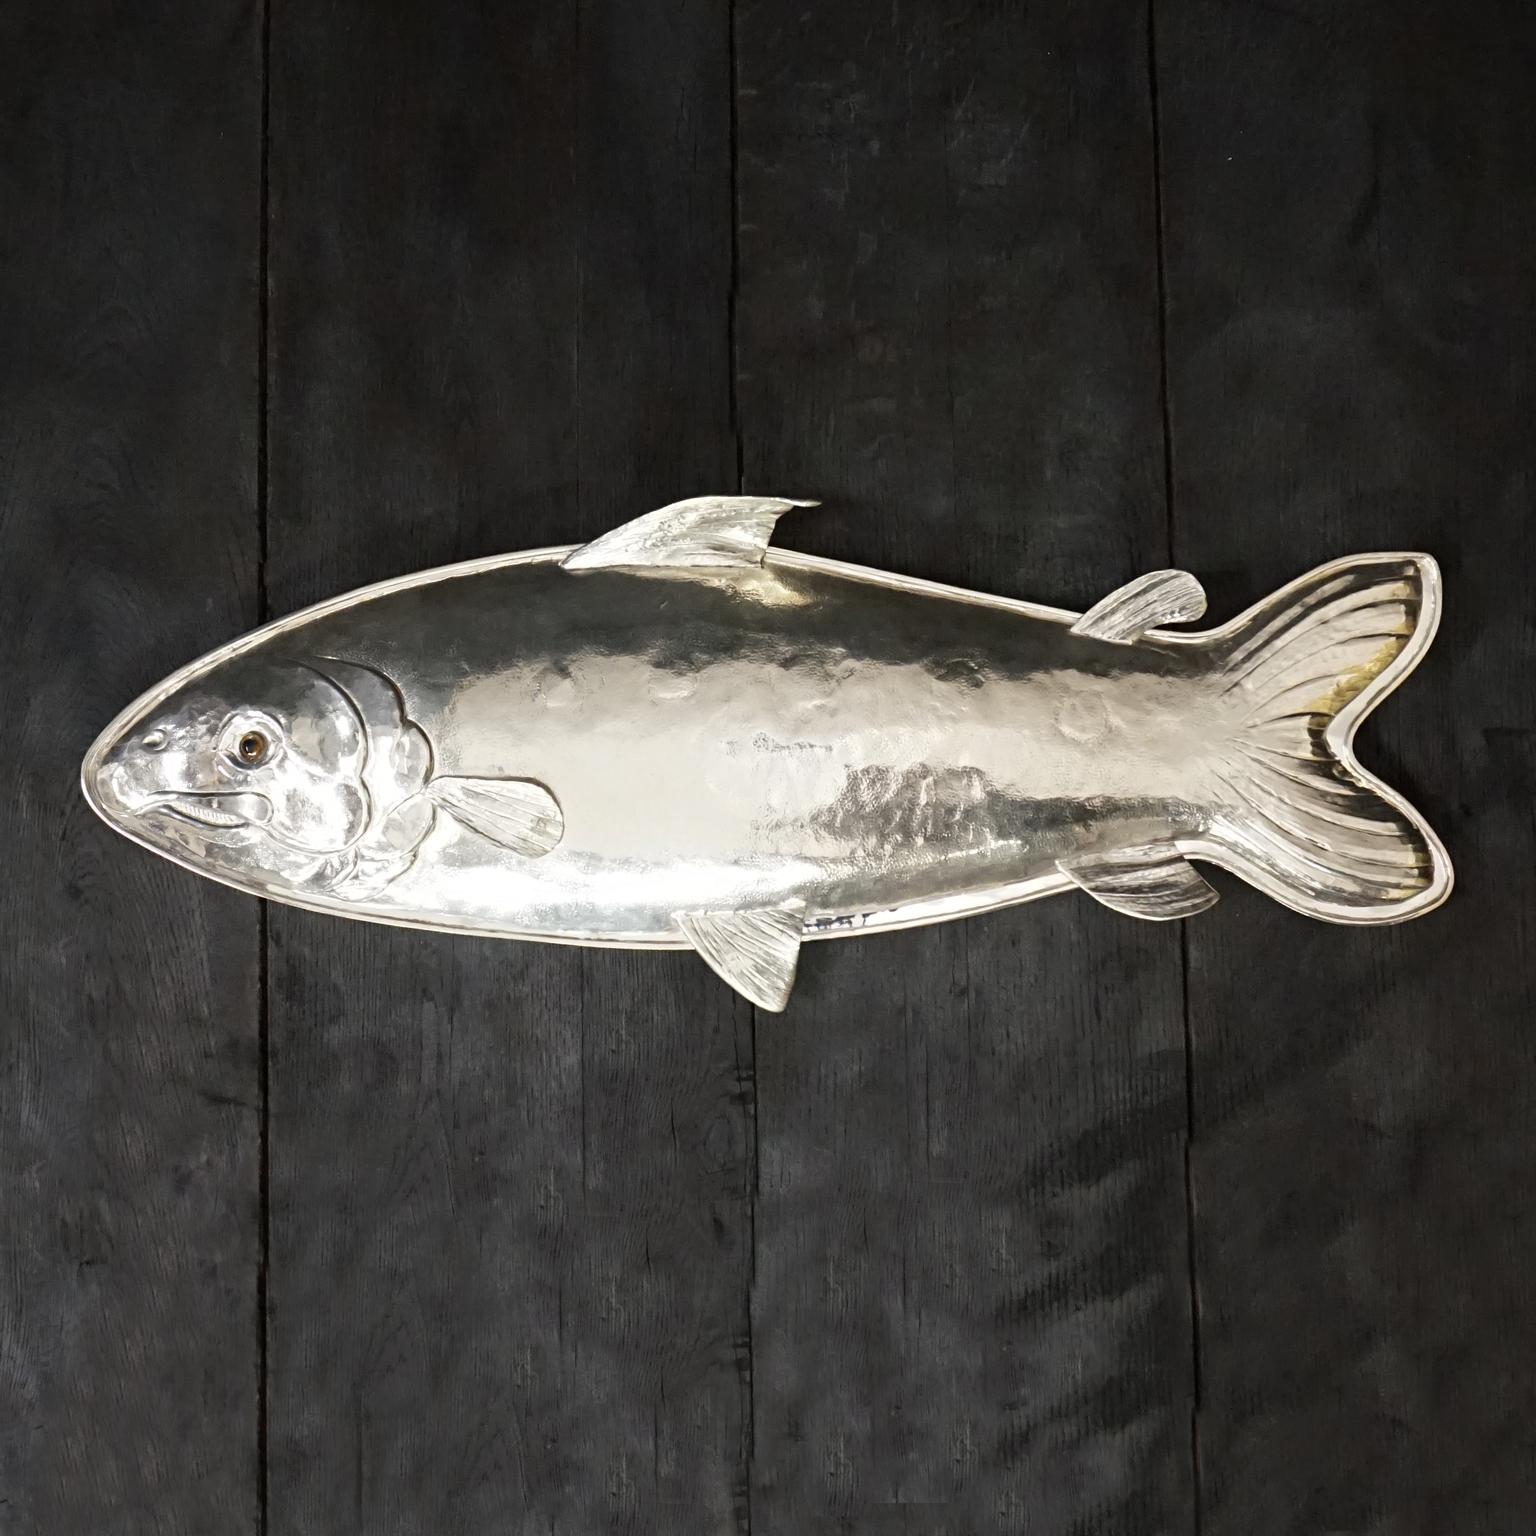 Very impressive Large 1970s Italian silver plated hand-hammered Franco Lagini Salmon fish serving platter.
Very detailed hammered salmon depiction with lifelike teeth, fins, gills and a glass brown eye.
The oval inside tray is deep with wide